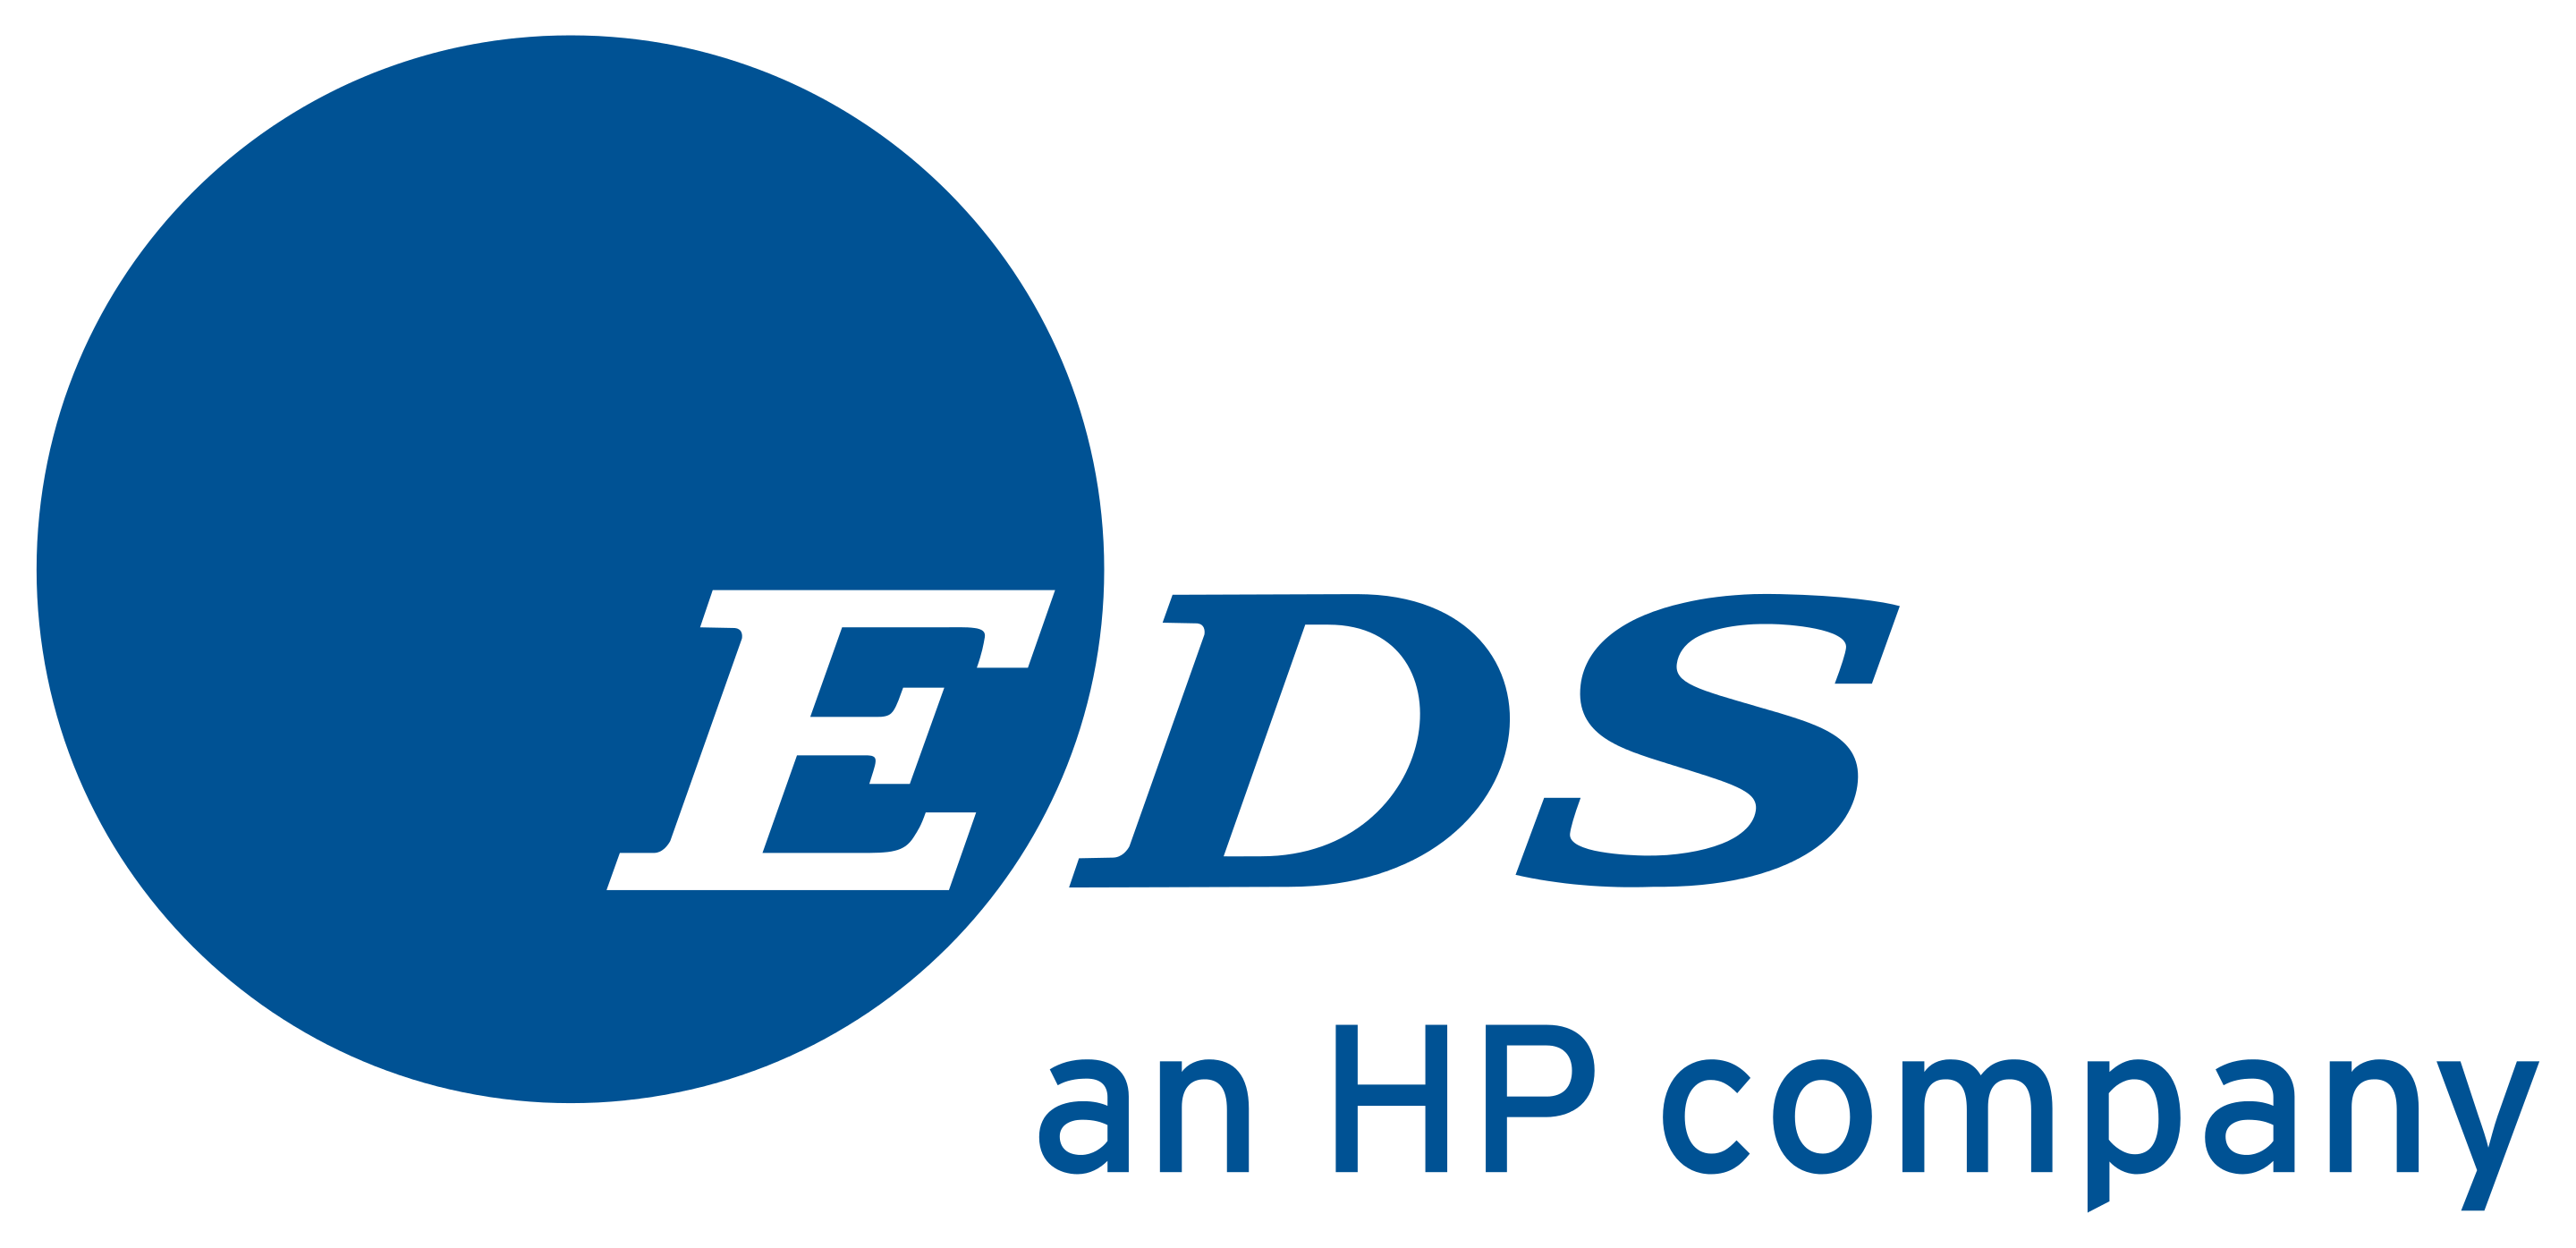 HP EDS - Electronic Data Systems